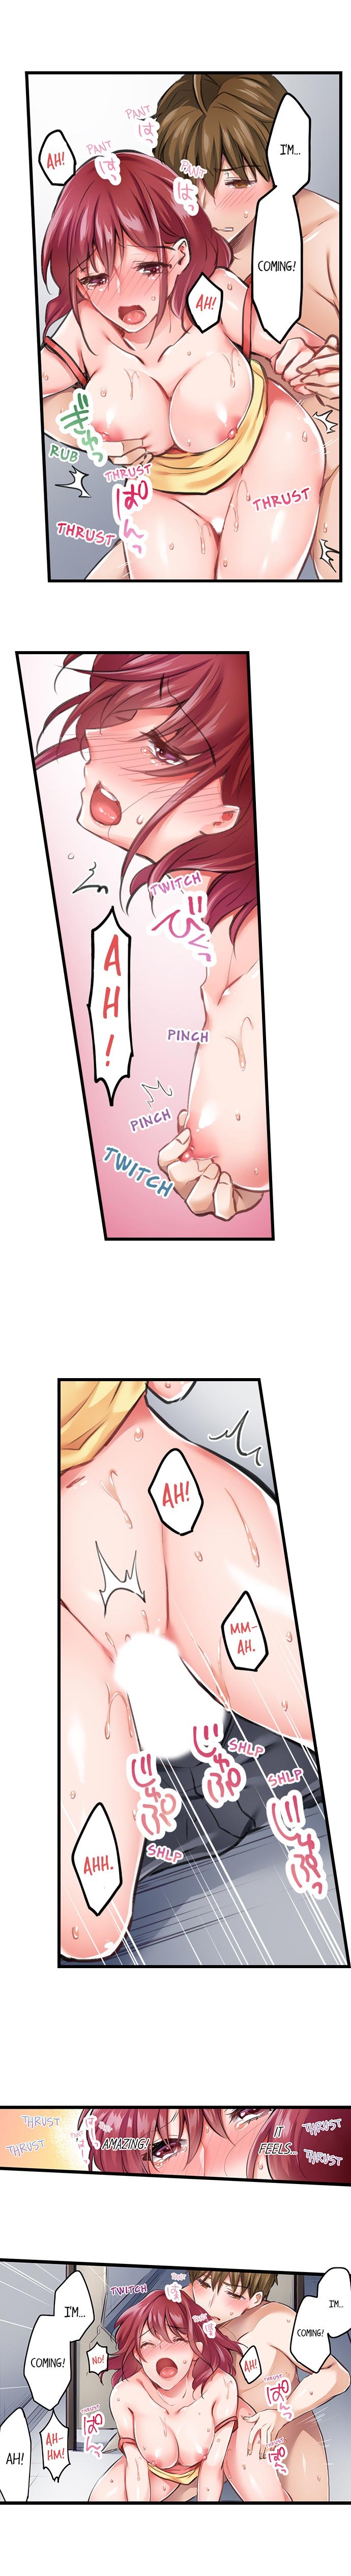 the-key-to-my-body-chap-3-8